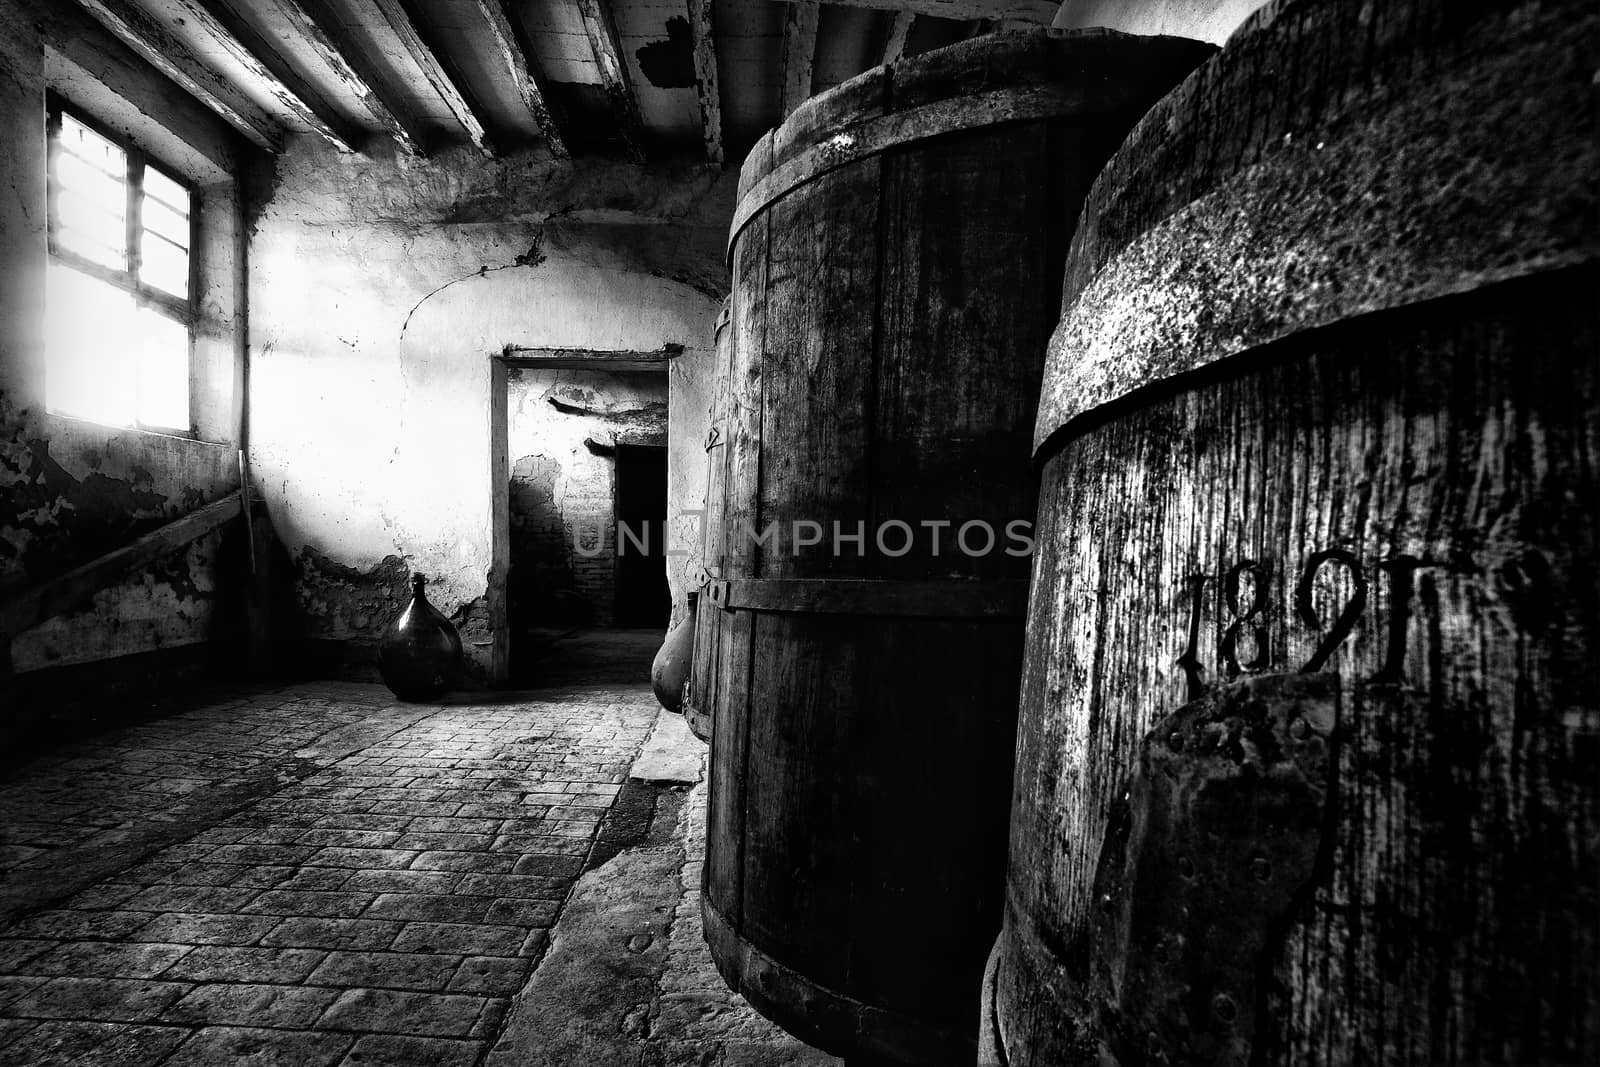 A very old barrels inside an abandoned countryhouse.